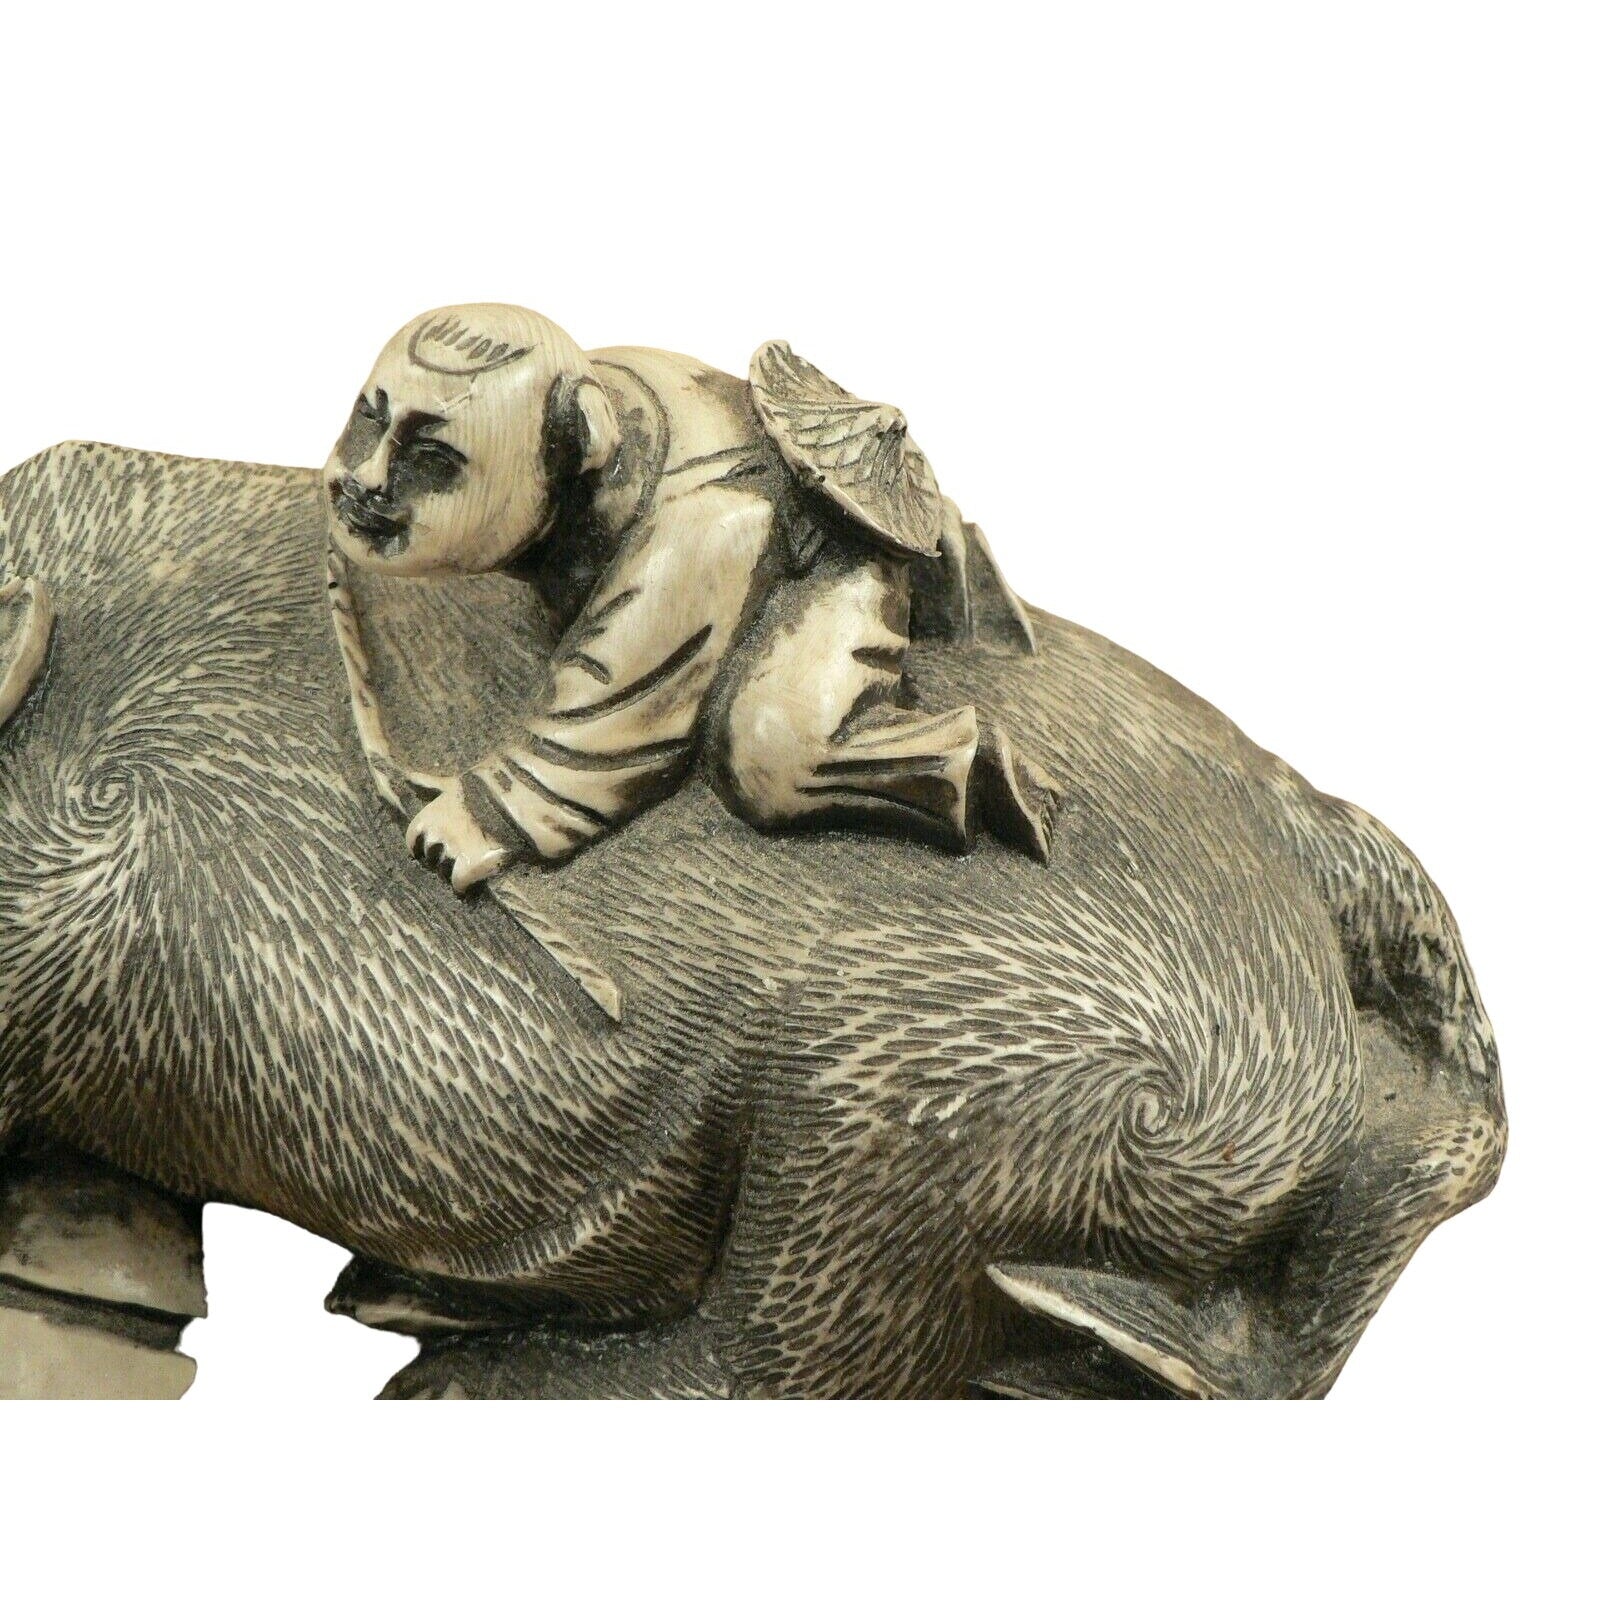 Asian style Oxen man decorative sculpture figurine etched resin